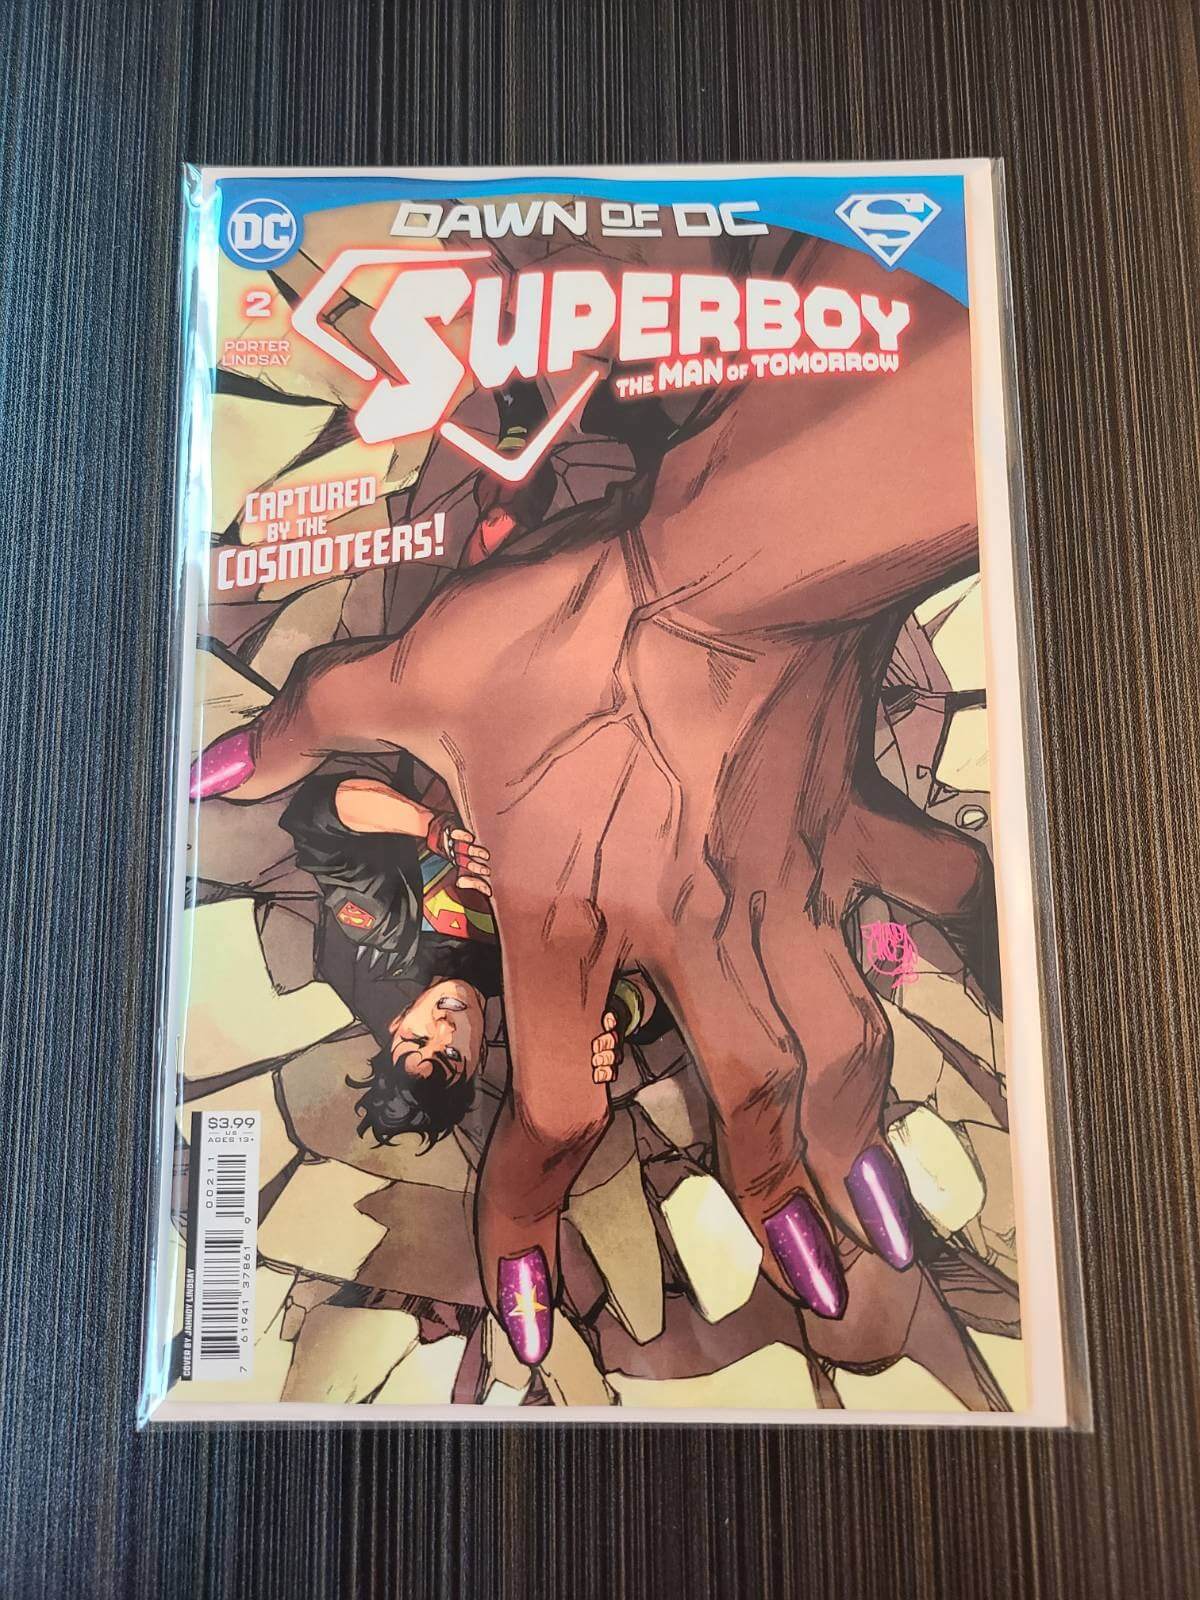 Superboy The Man of Tomorrow #2 (of 6) Cover A Jahnoy Lindsay